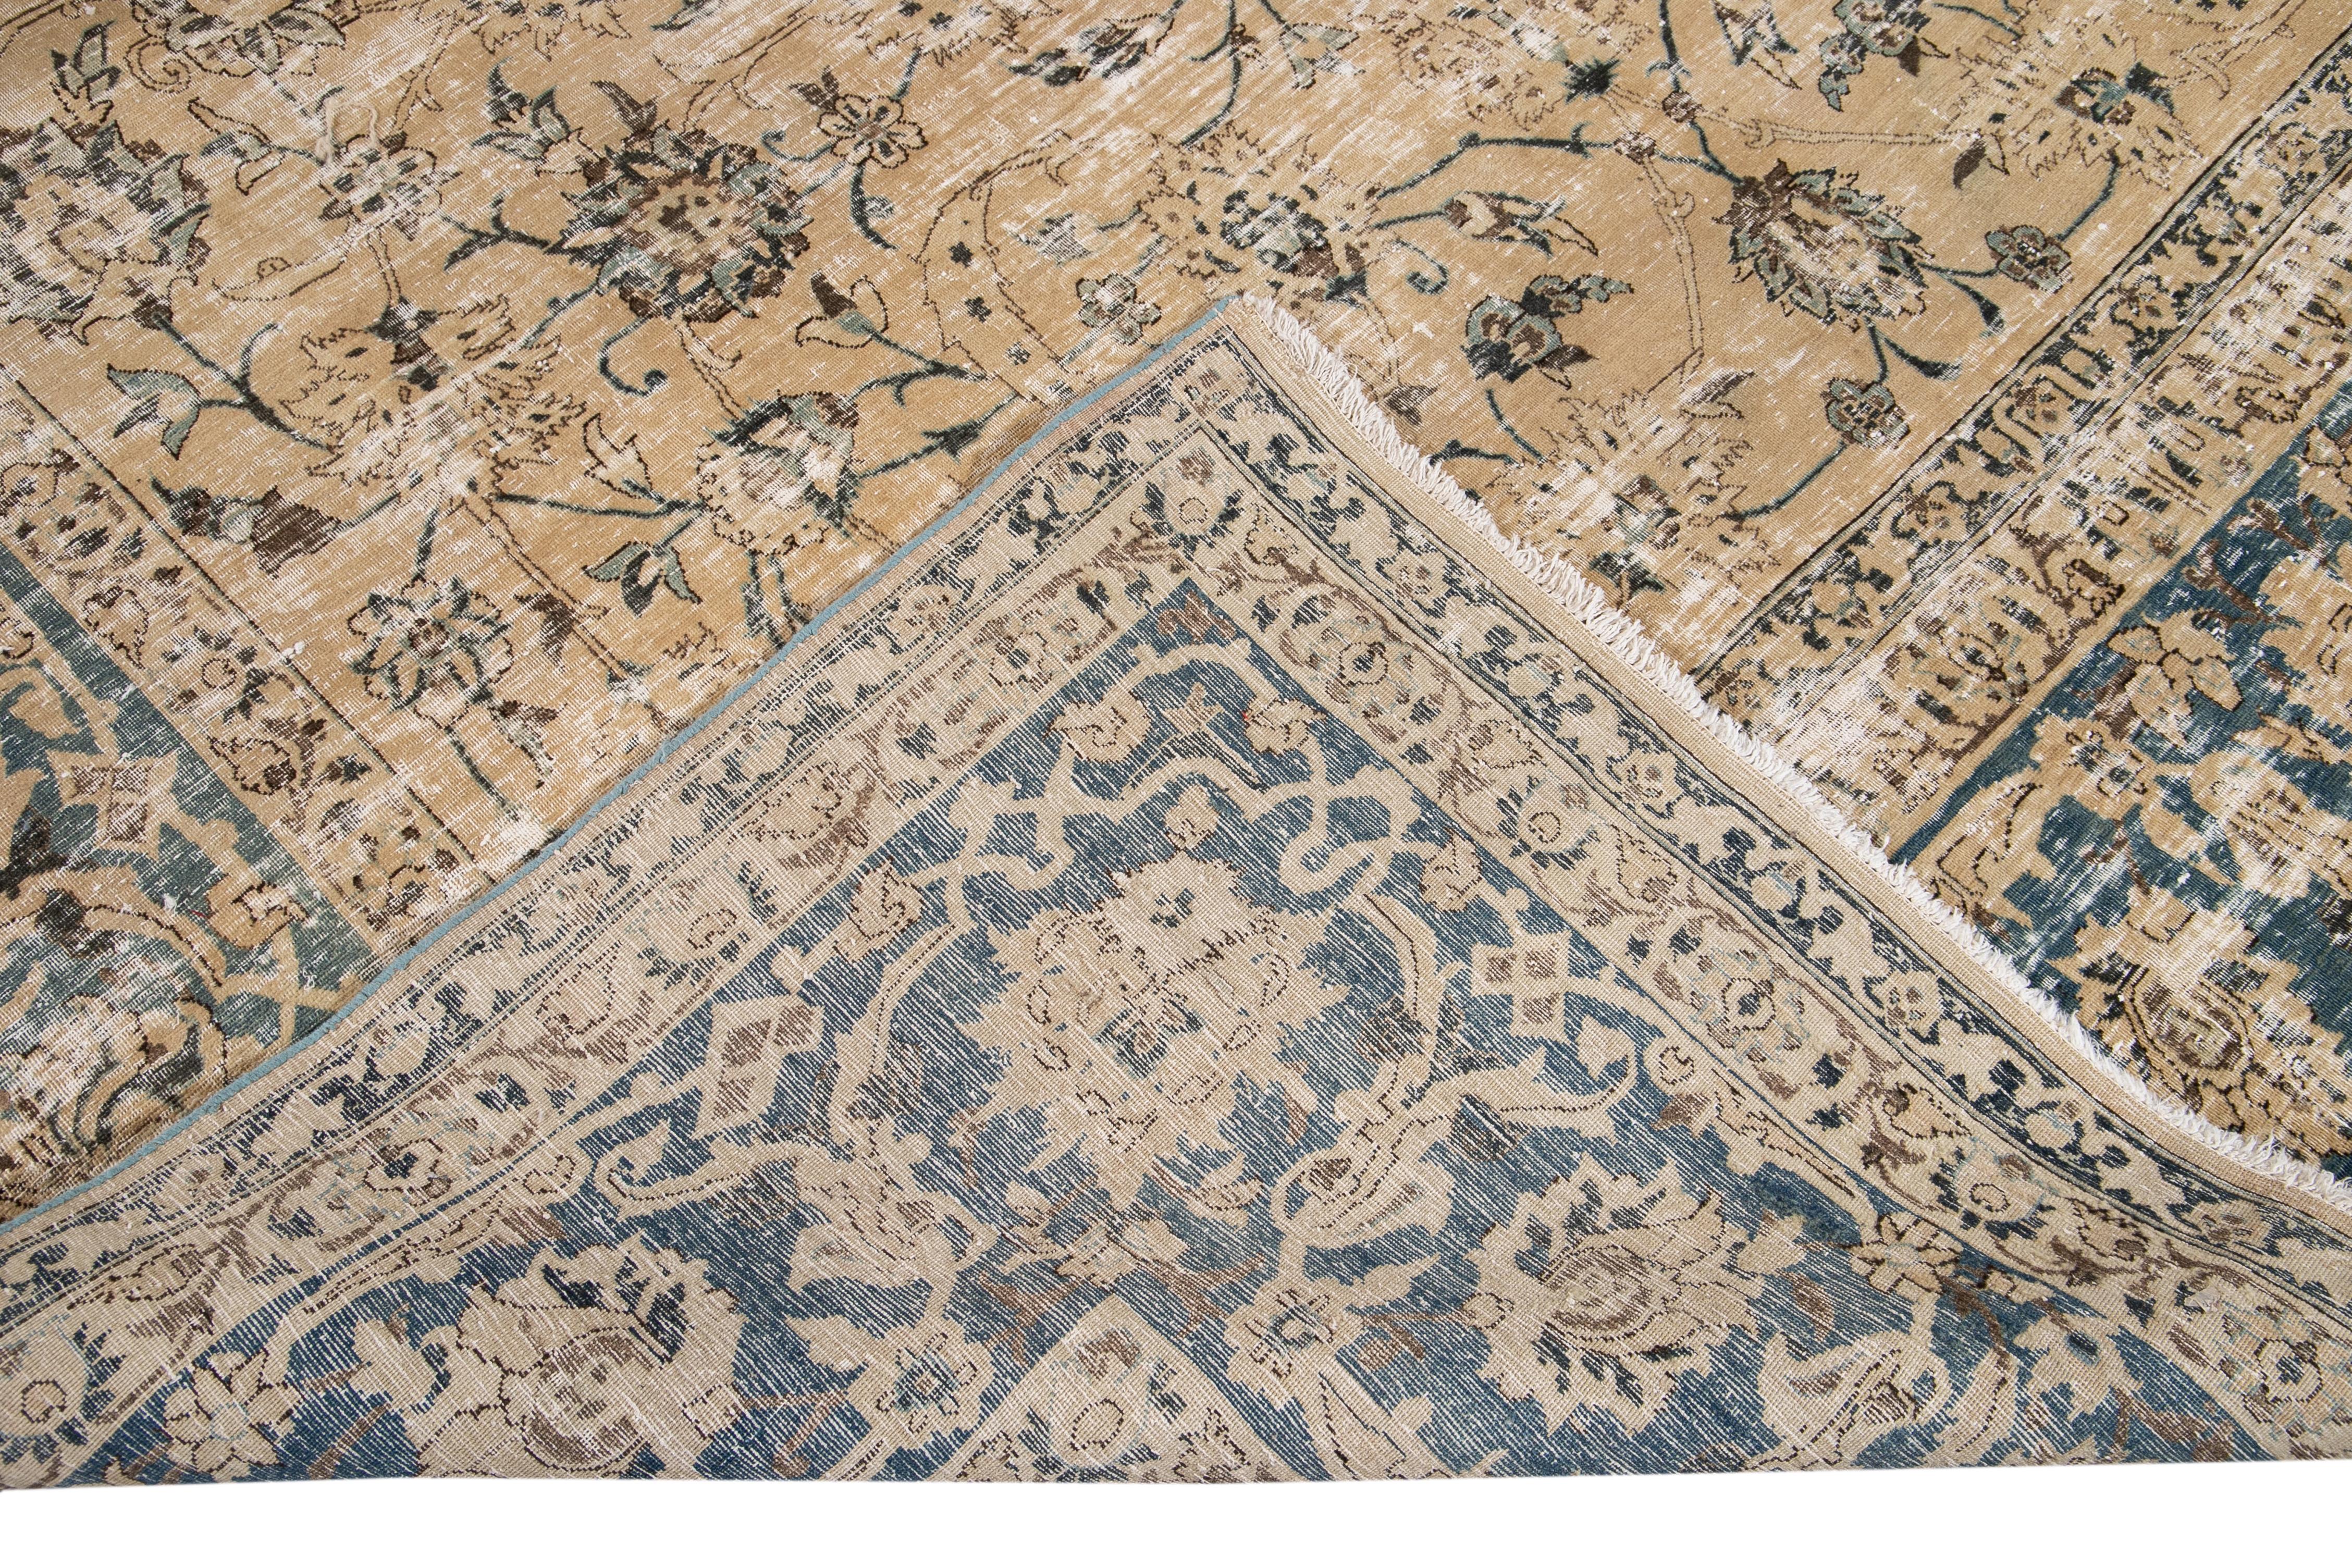 Beautiful antique Malayer hand-knotted wool rug with a beige field. This Malayer rug has a blue frame and accents of brown and blue in an all-over gorgeous medallion floral design.

This rug measures: 9'10